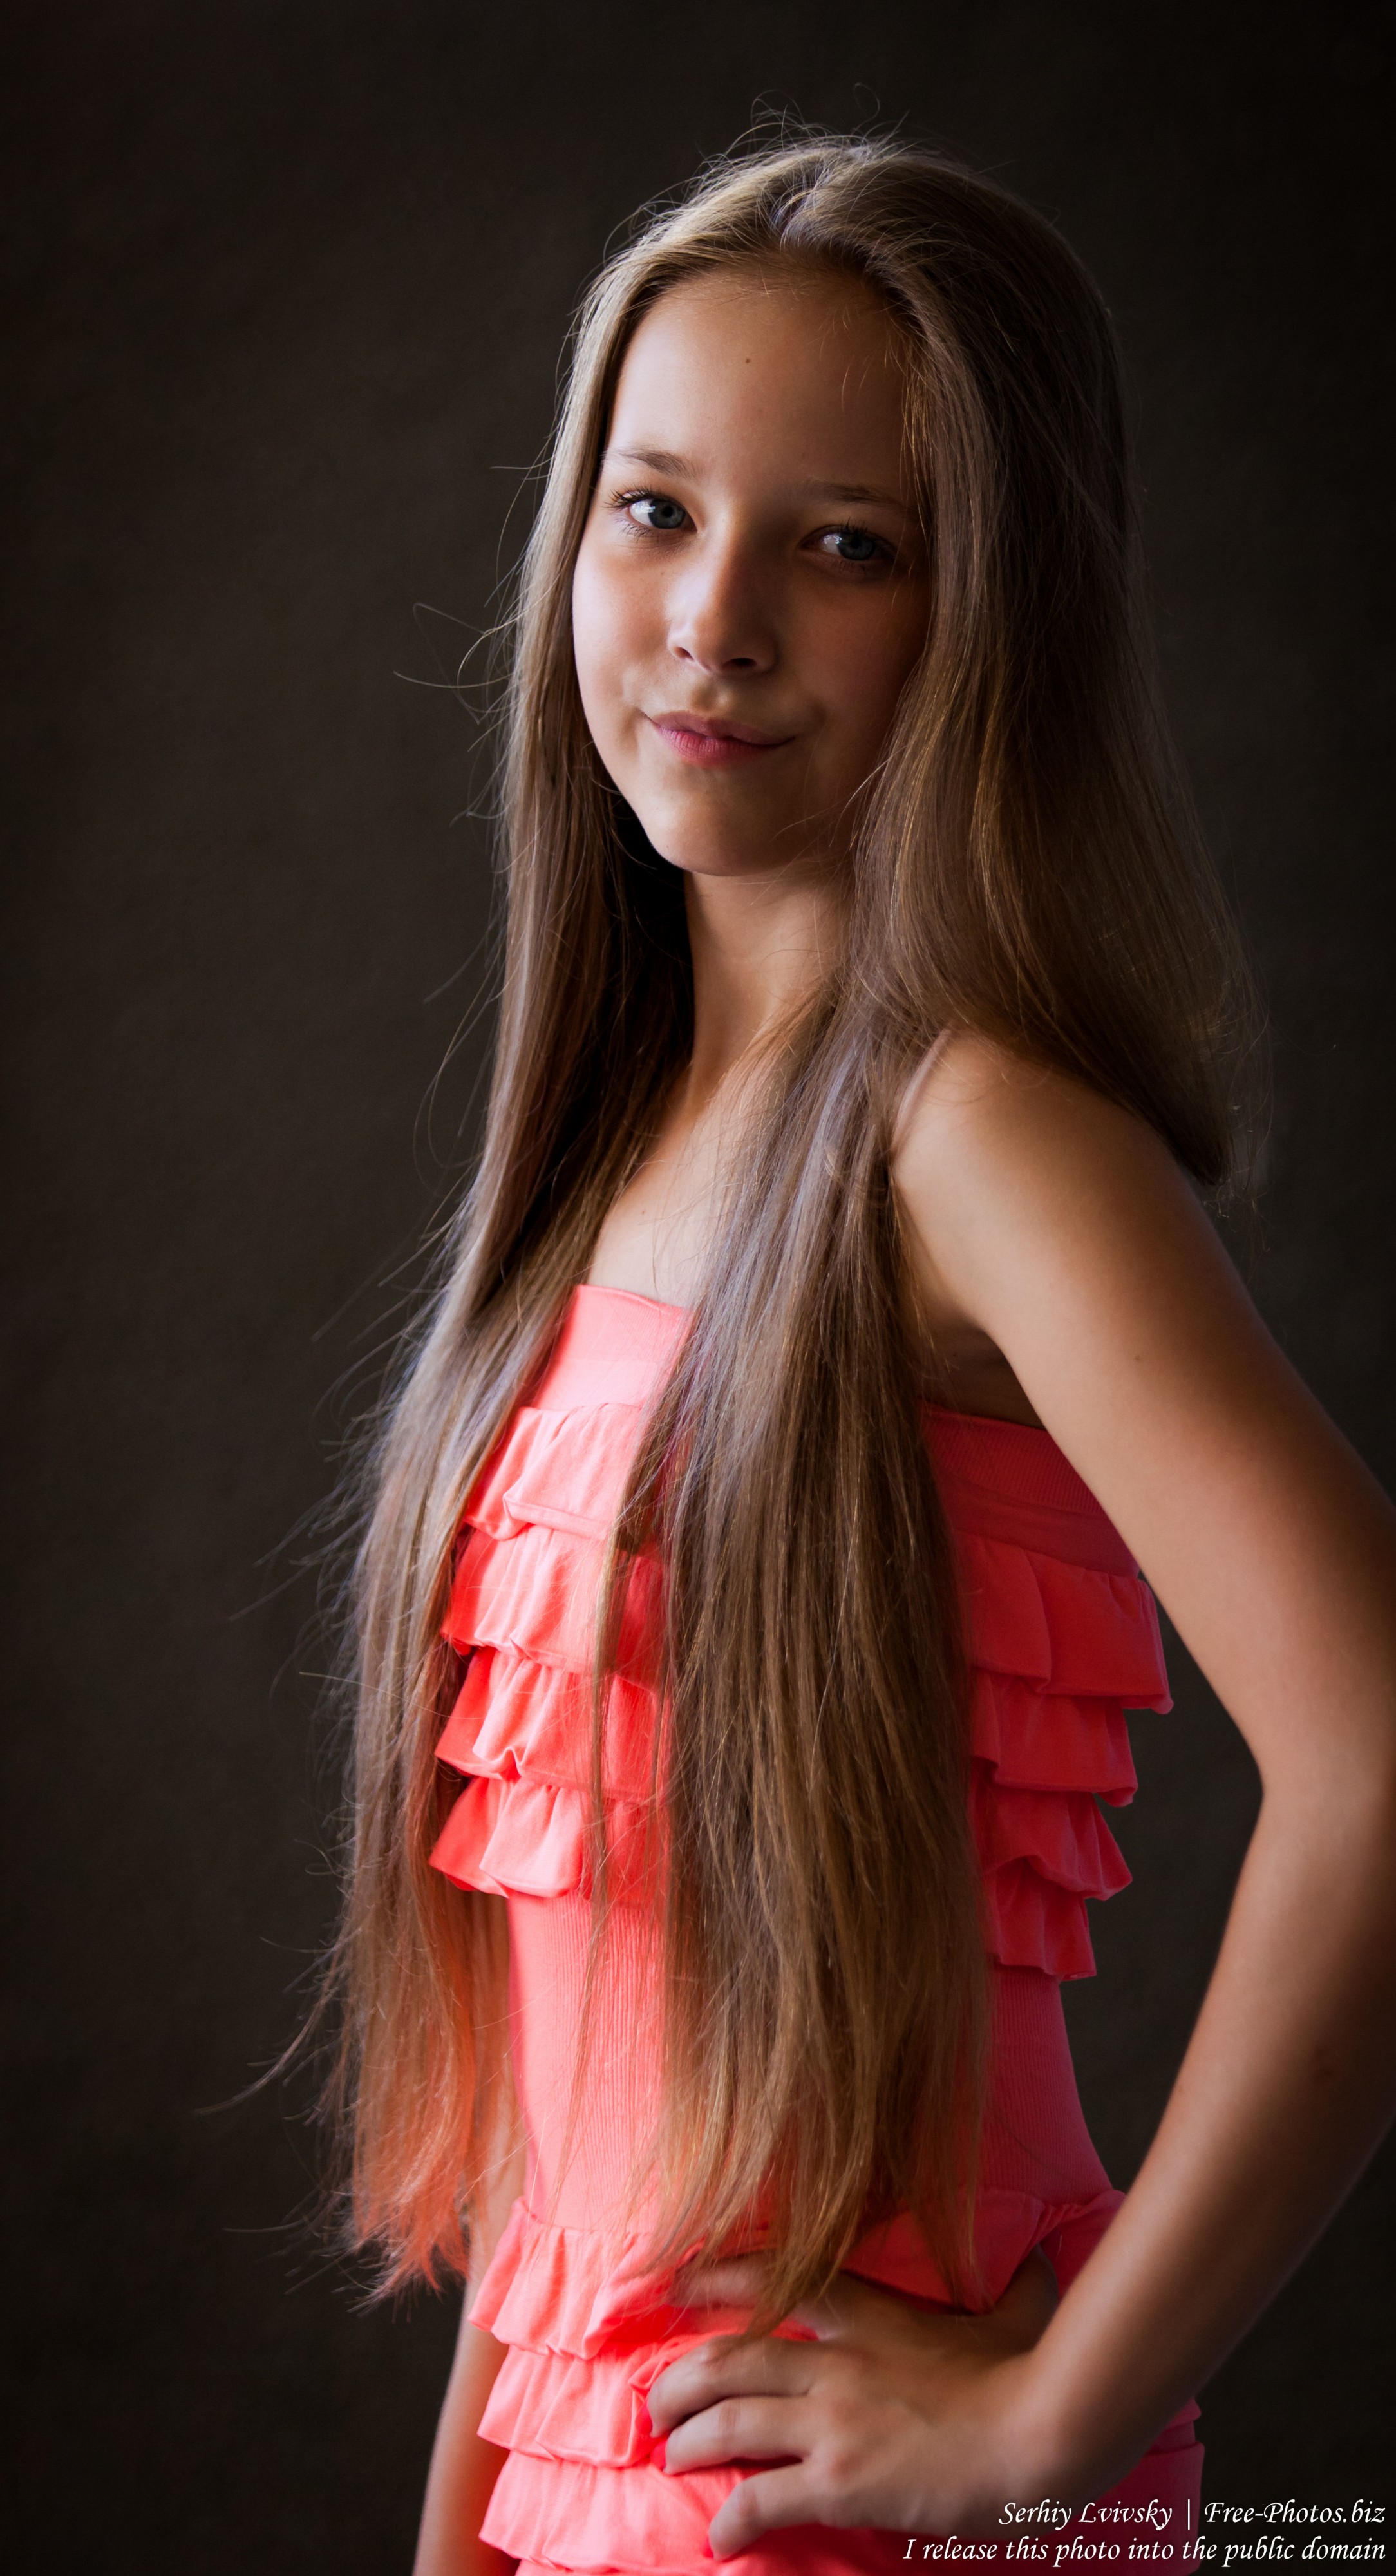 Photo of a pretty 13yearold girl photographed in July 2015 by Serhiy